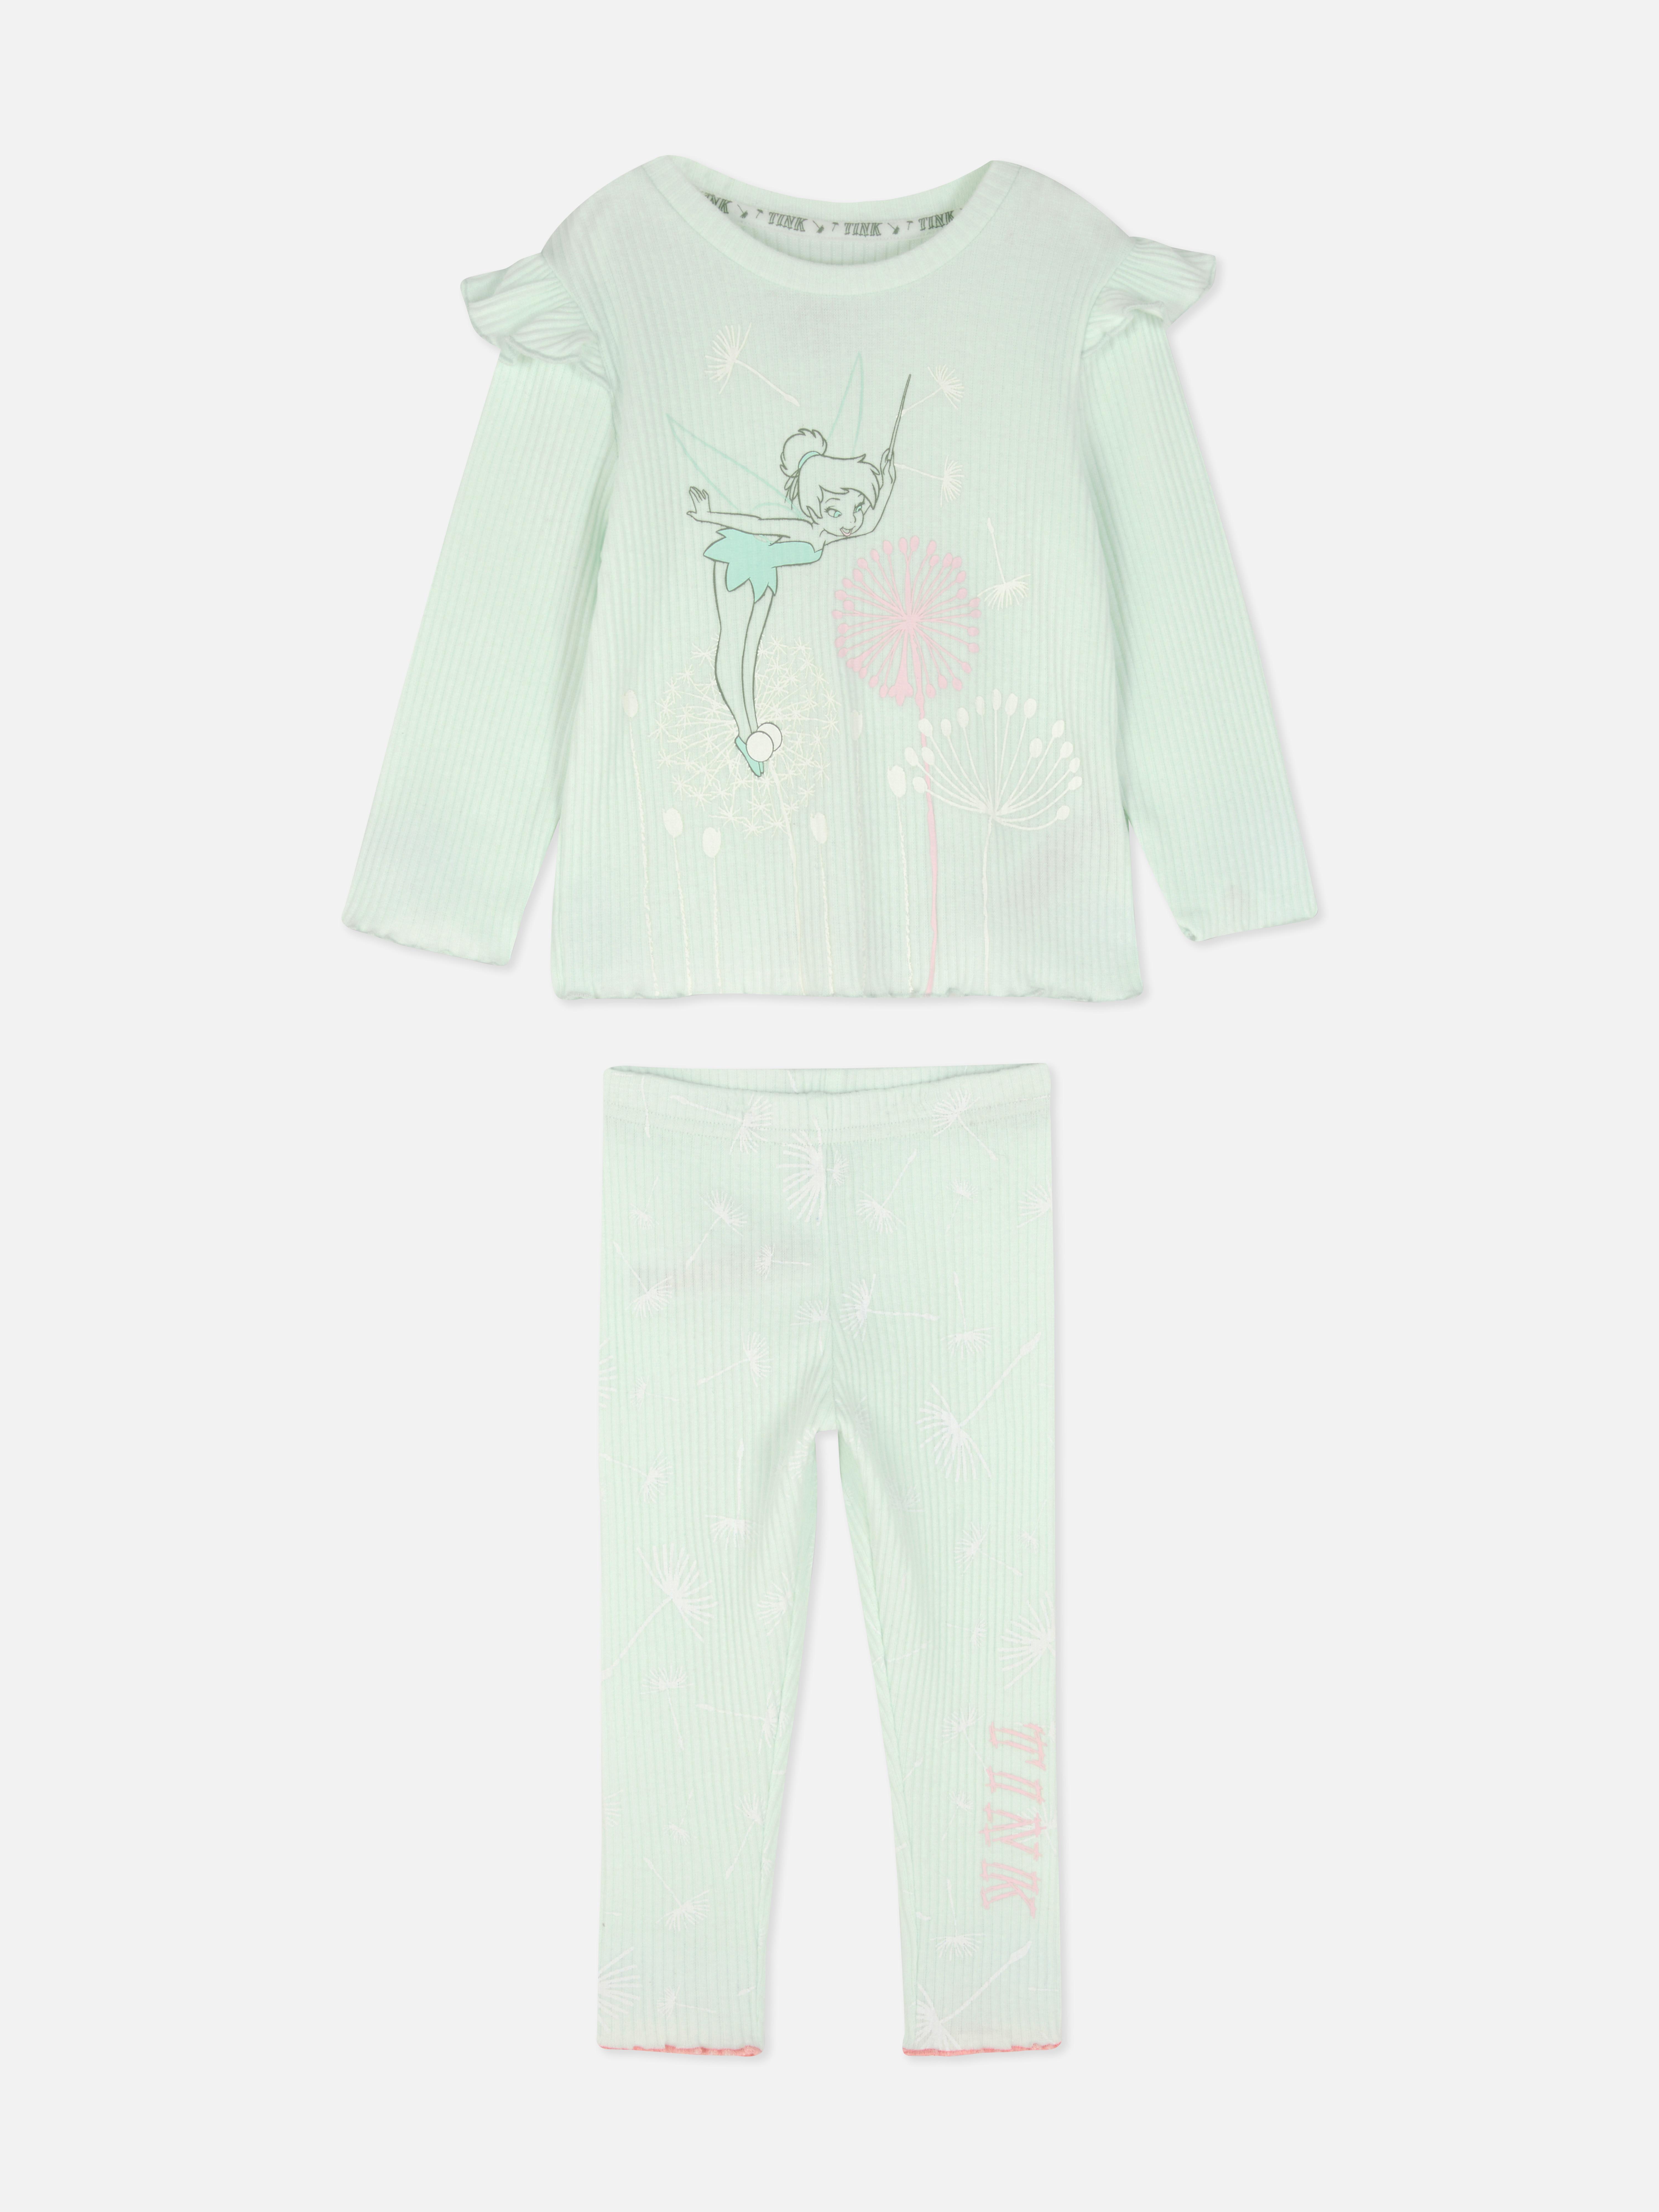 Two-Piece Disney's Tinker Bell Long Sleeve Outfit